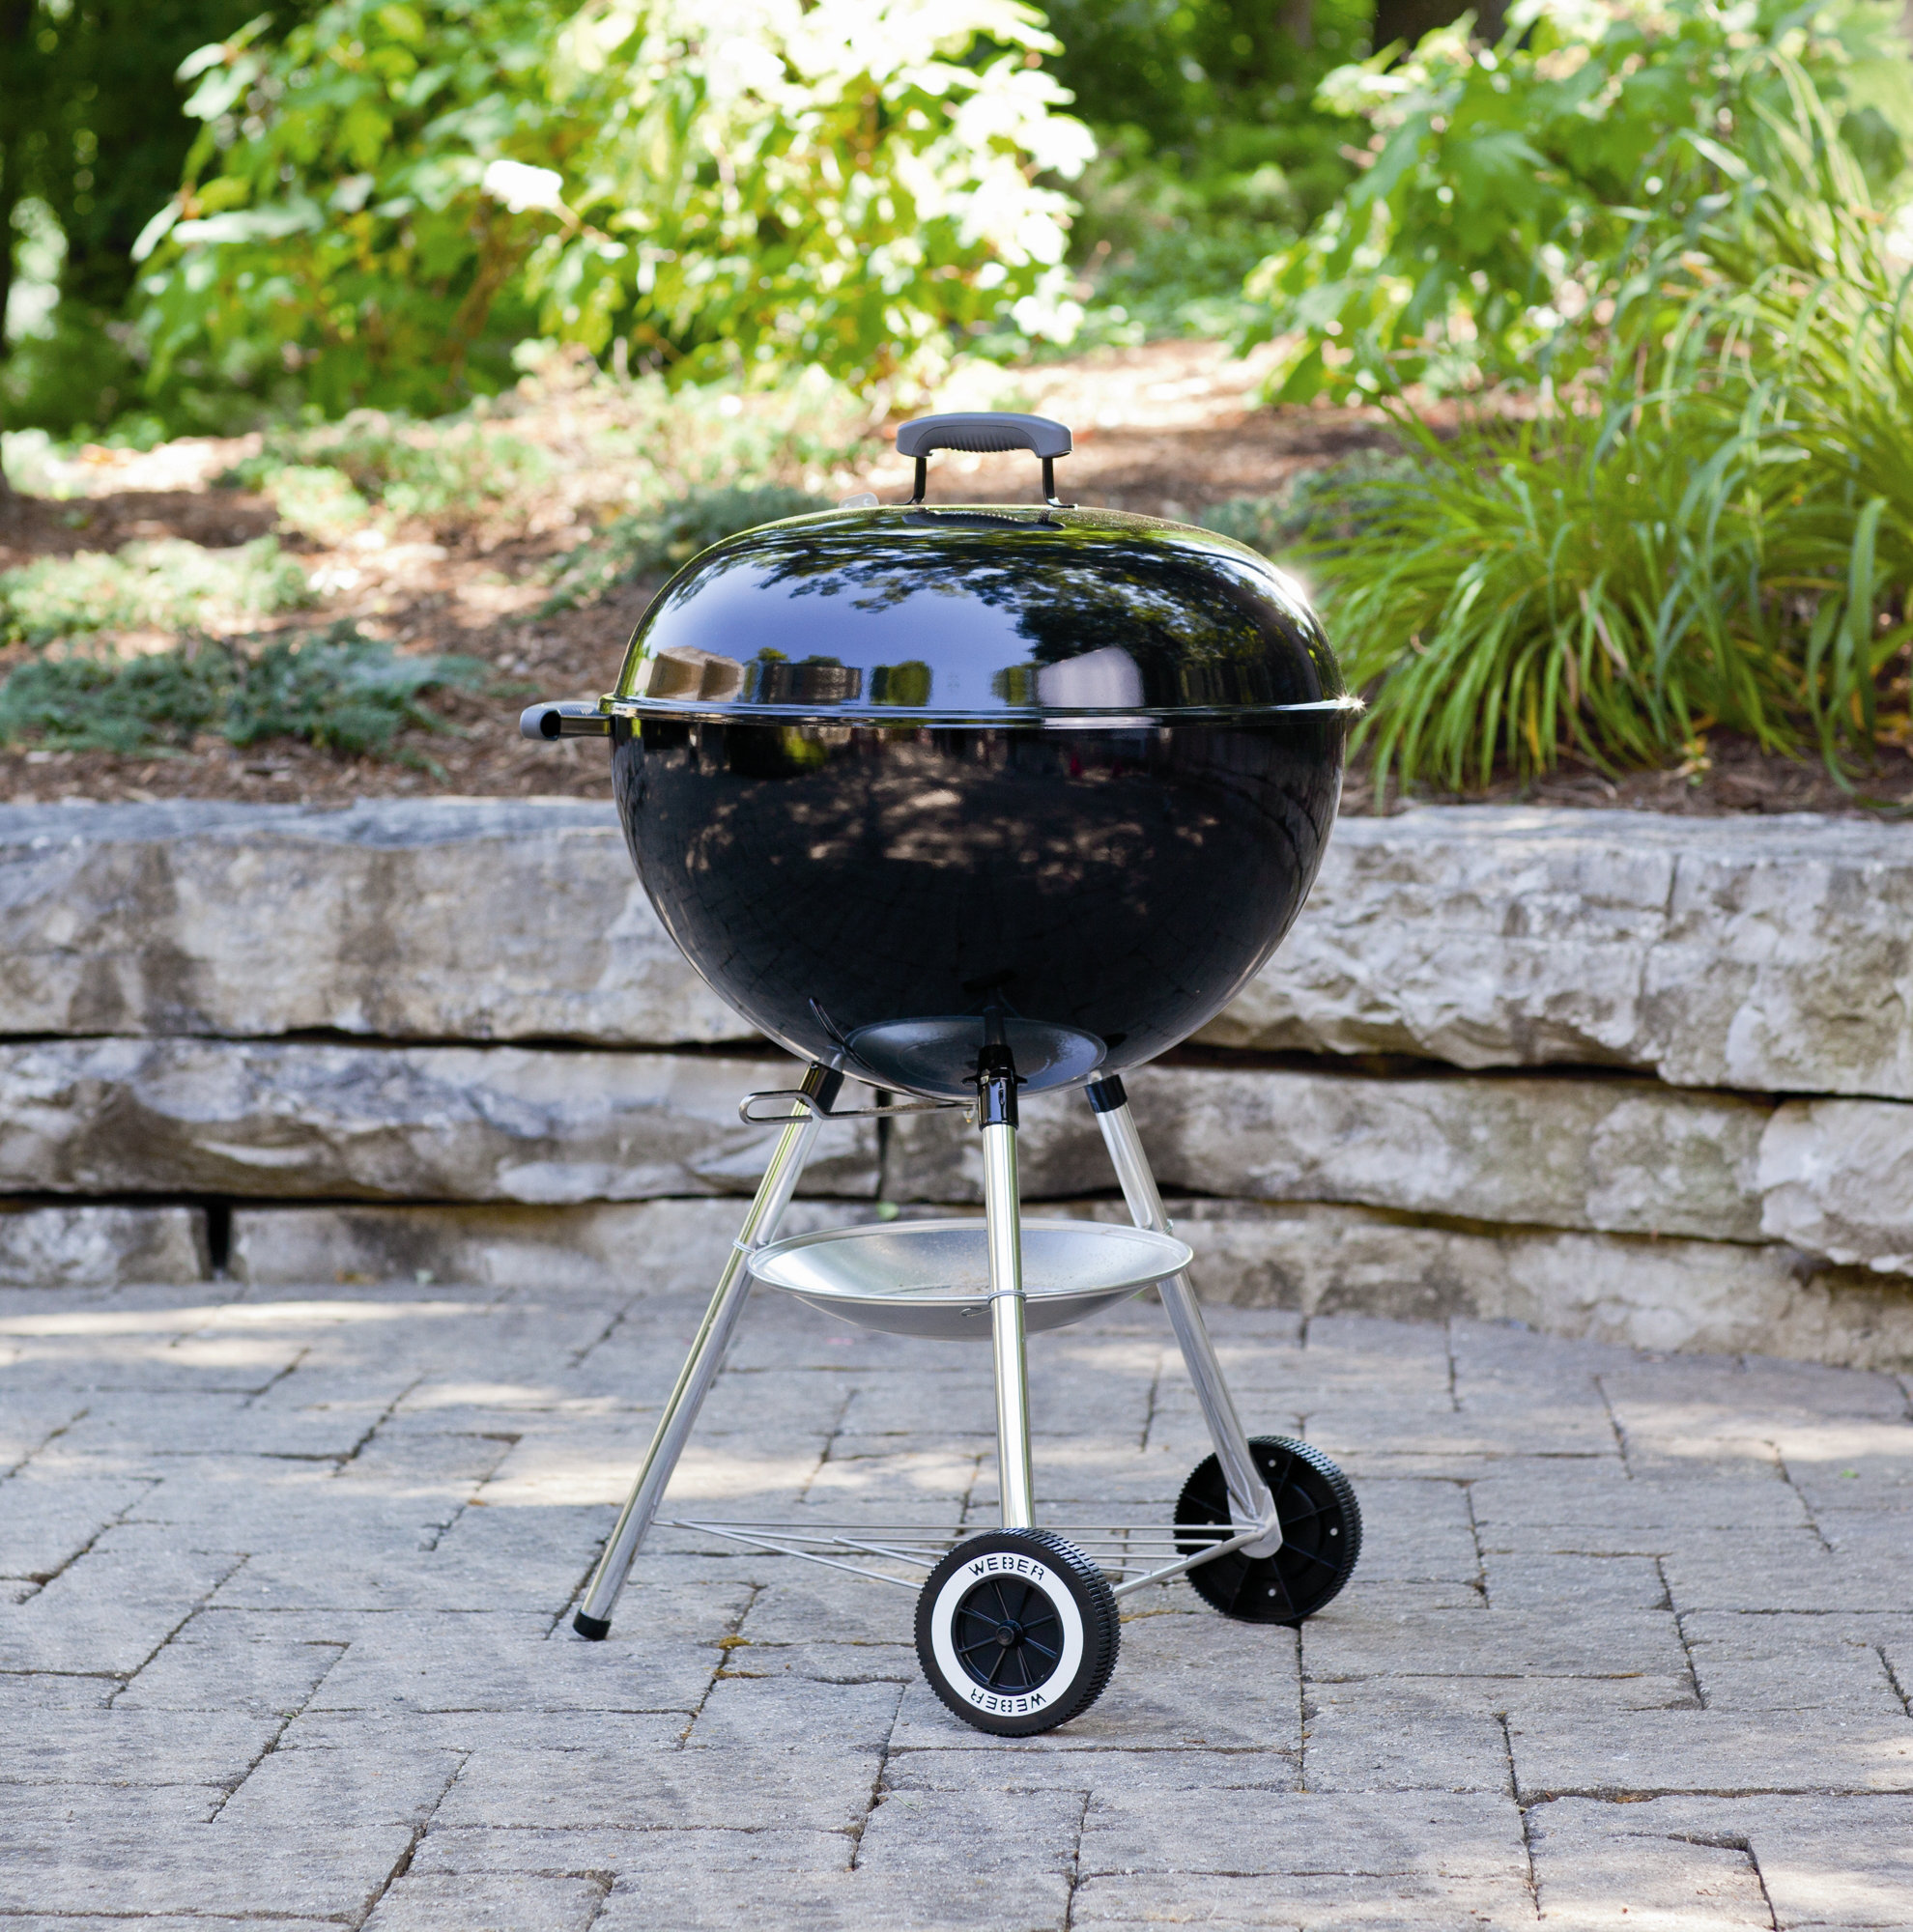 Weber 22 in. Original Kettle Charcoal Grill in Black 741001 - The Home Depot